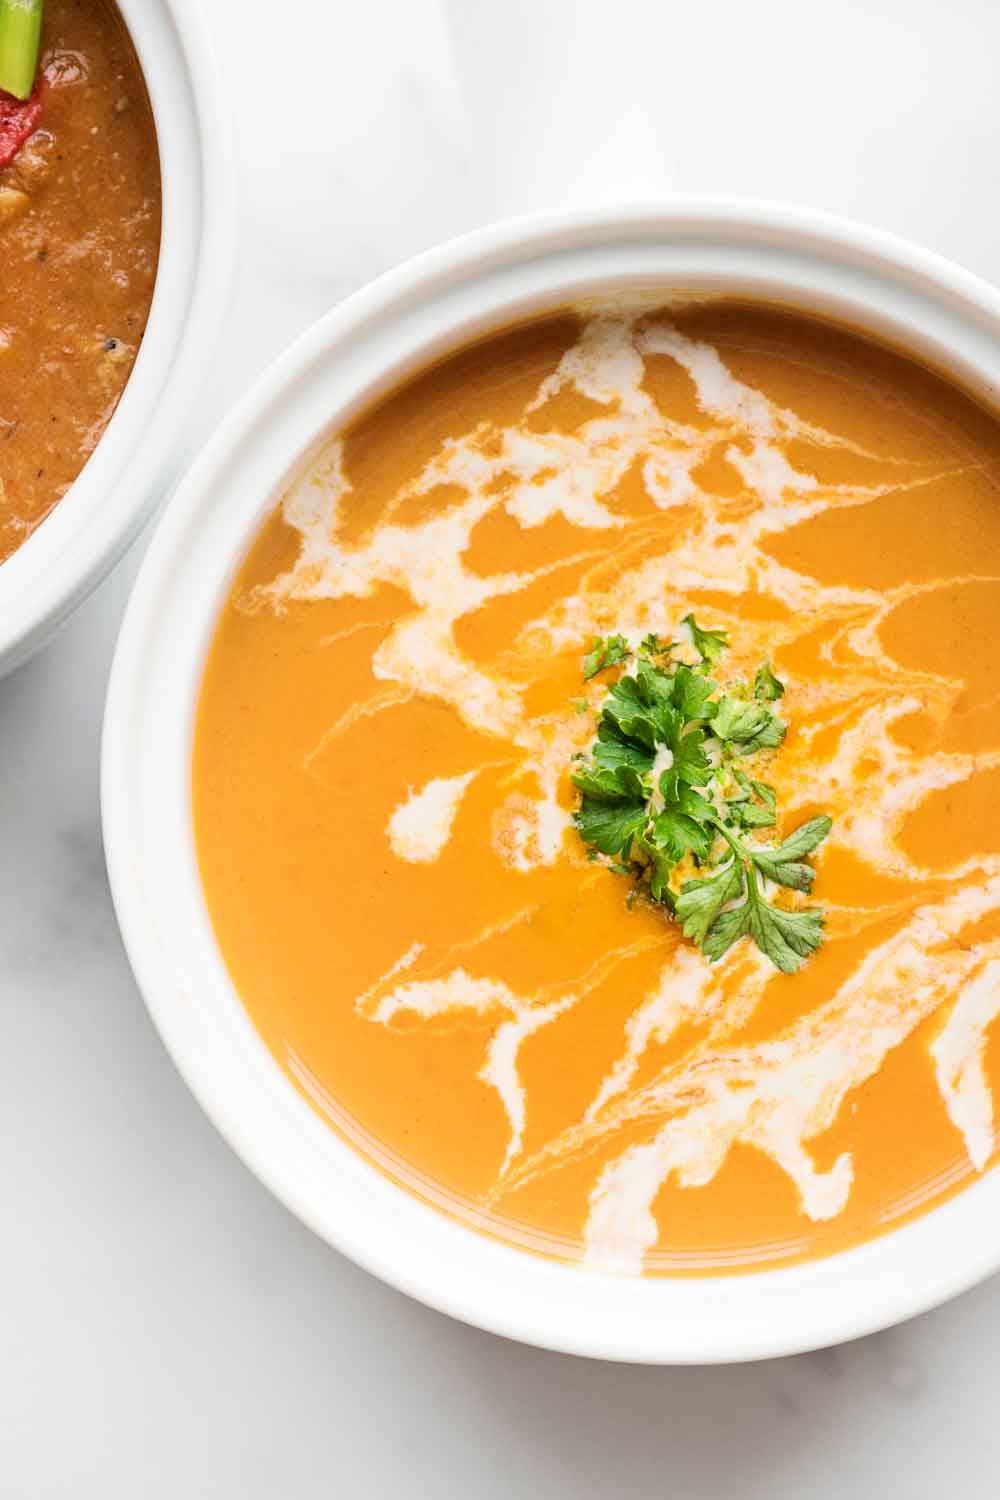 Soups: A Warm and Nutritious Choice